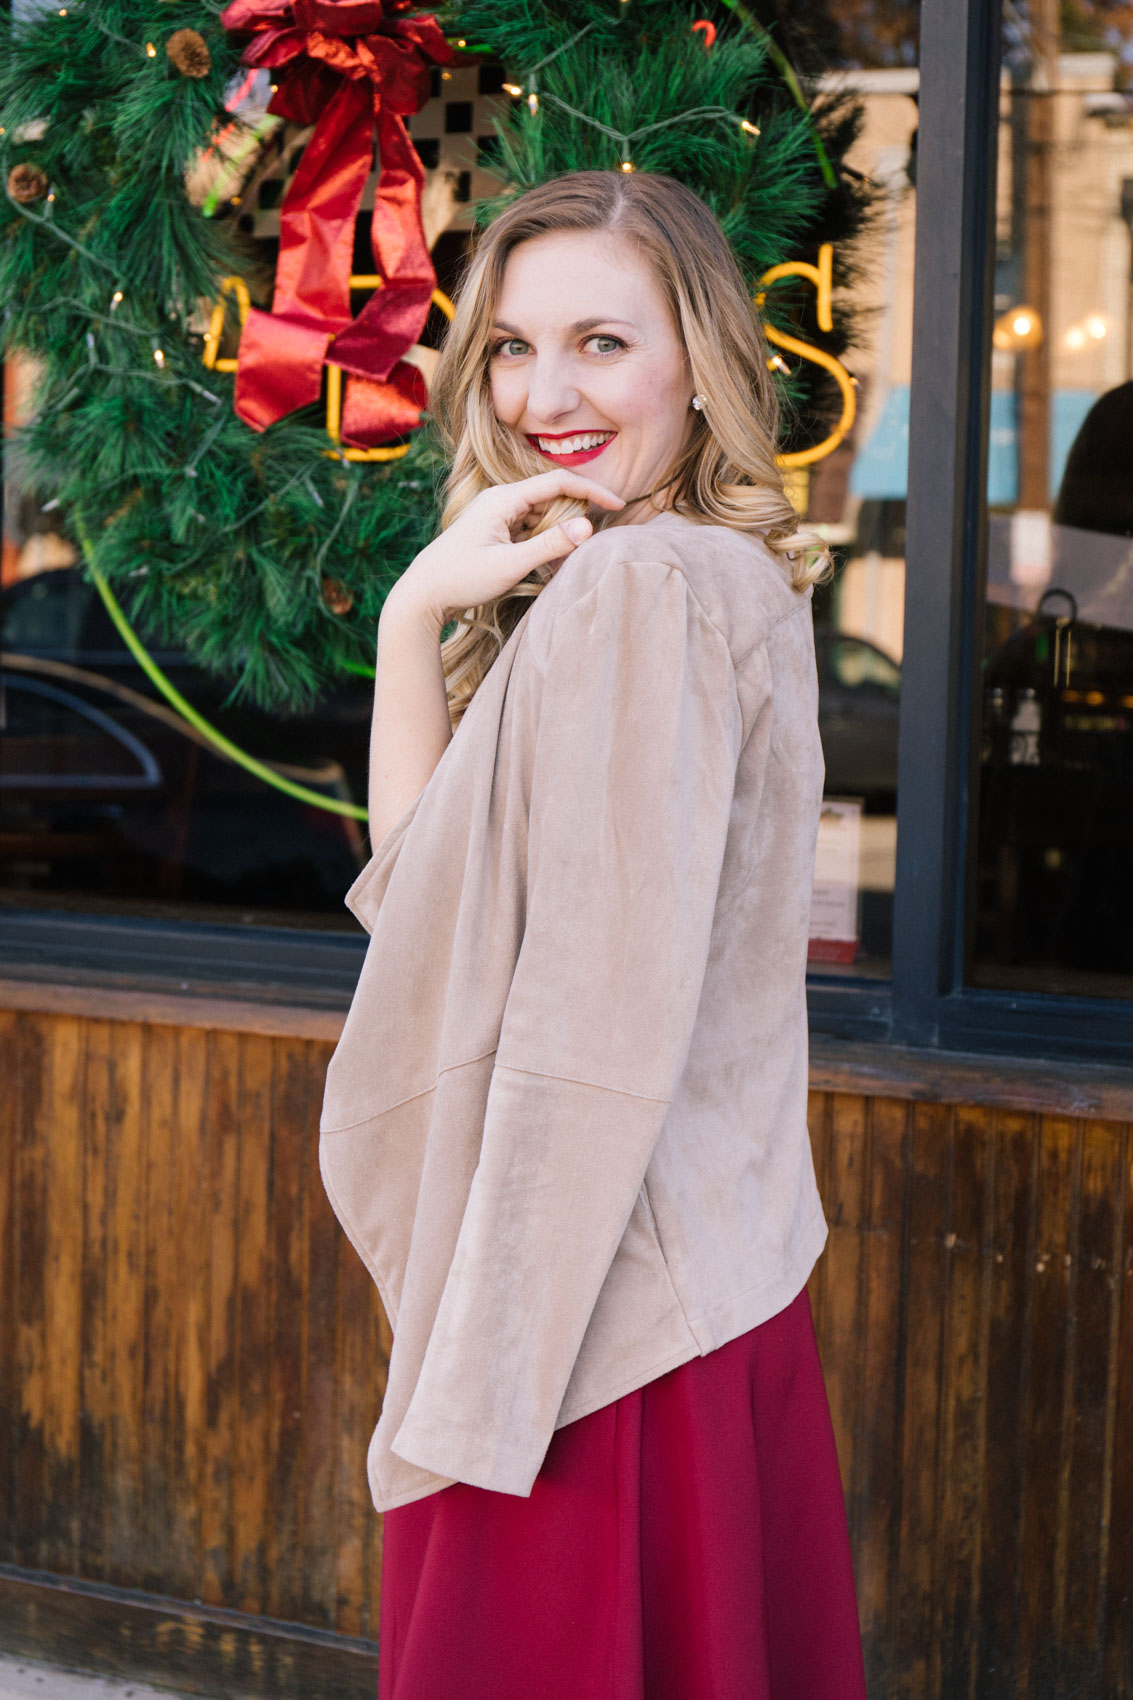 Tan faux suede jacket styled over a red dress for a classy winter outfit